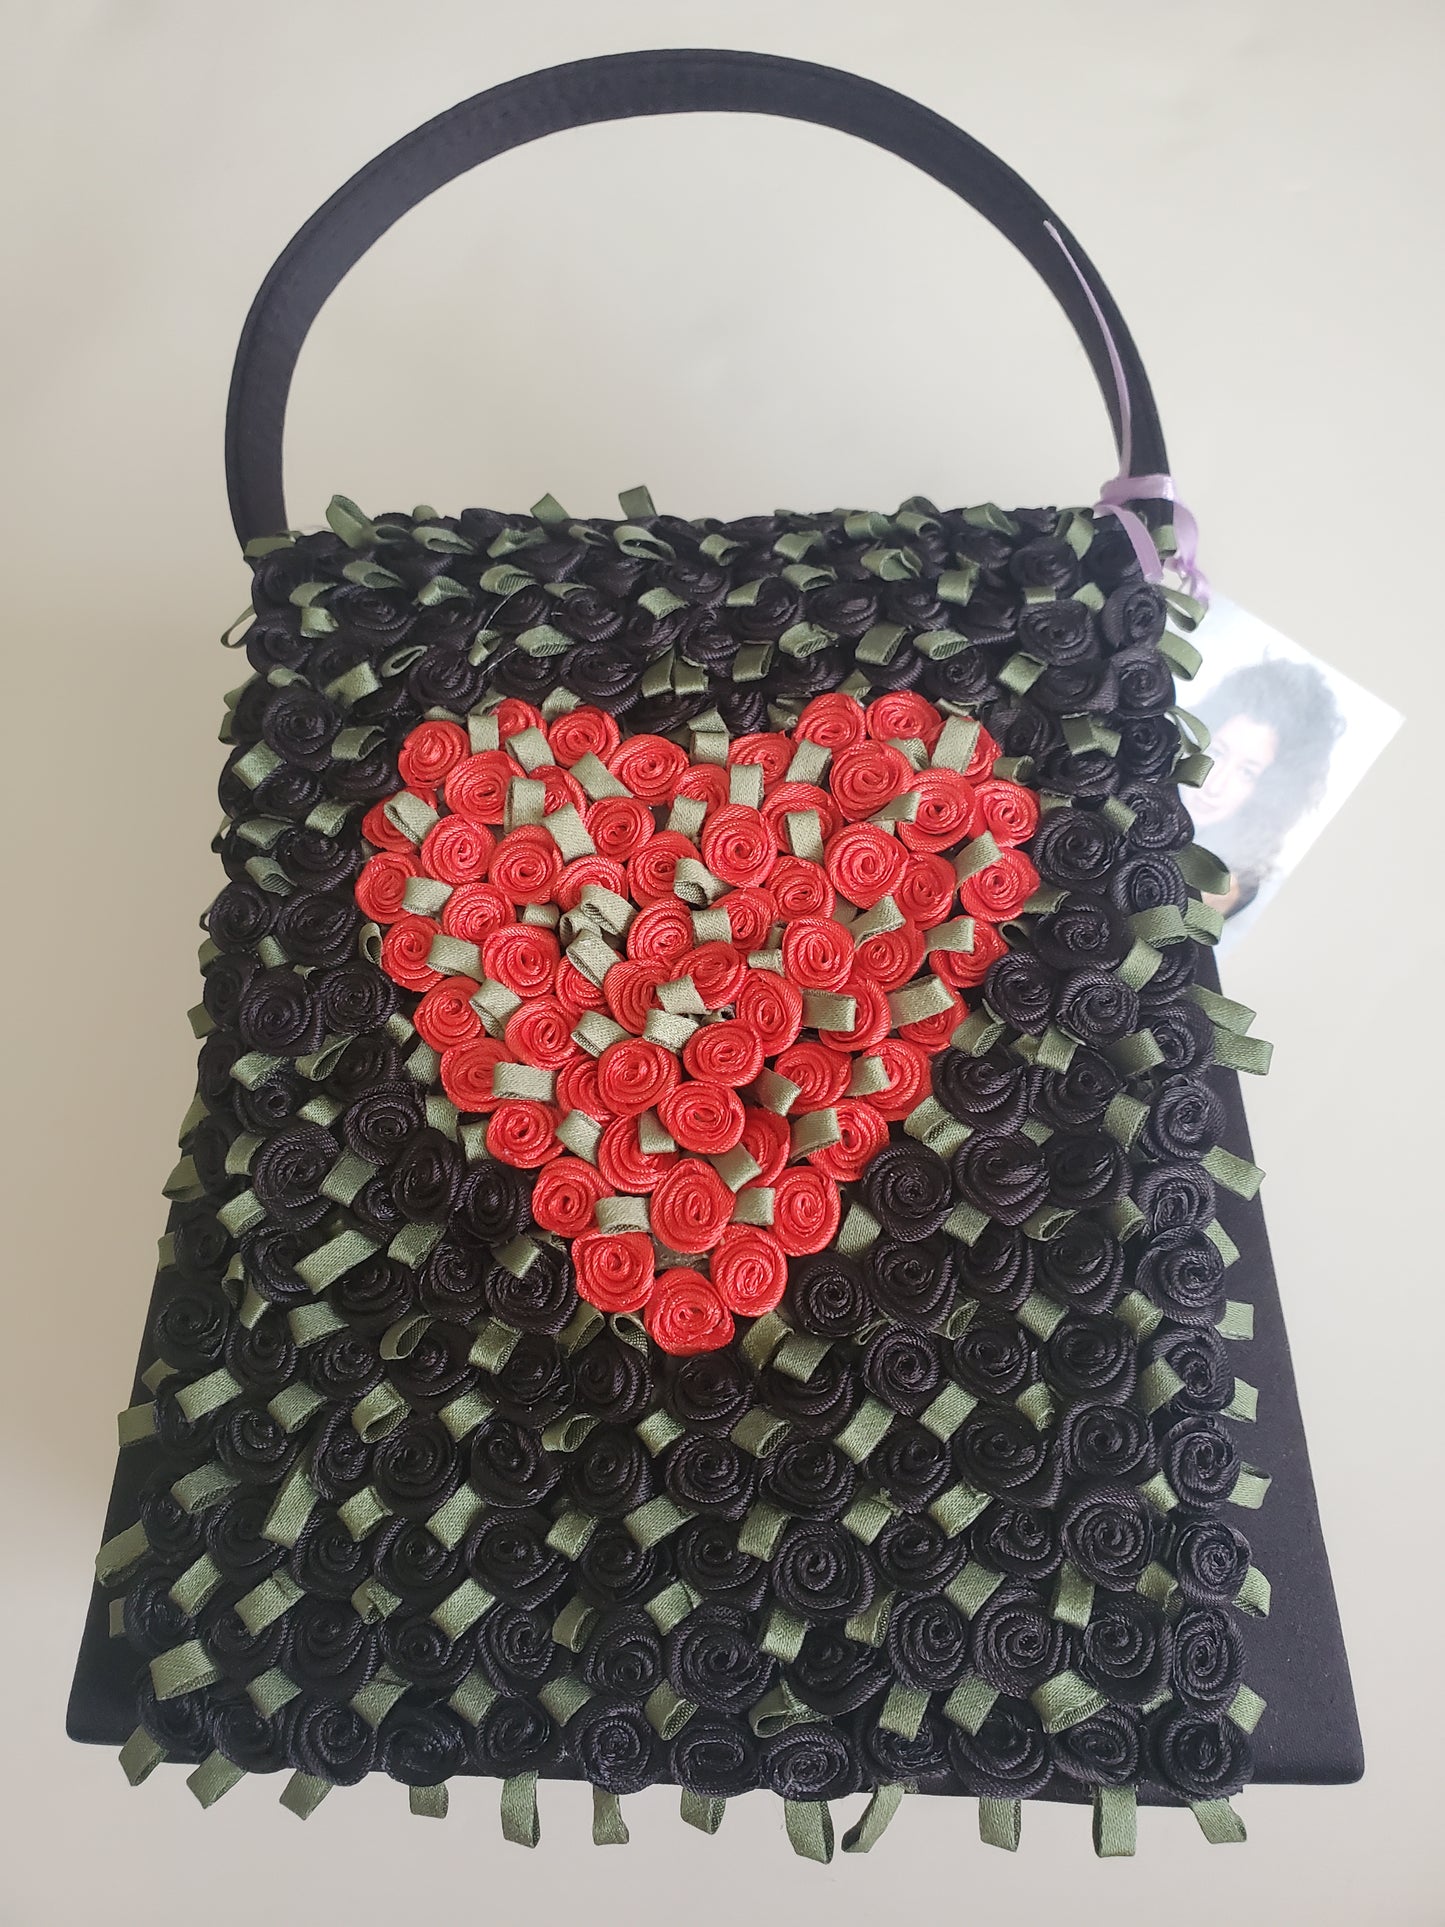 Black evening purse covered in black silk ribbon roses  with a center heart design in red ribbon roses